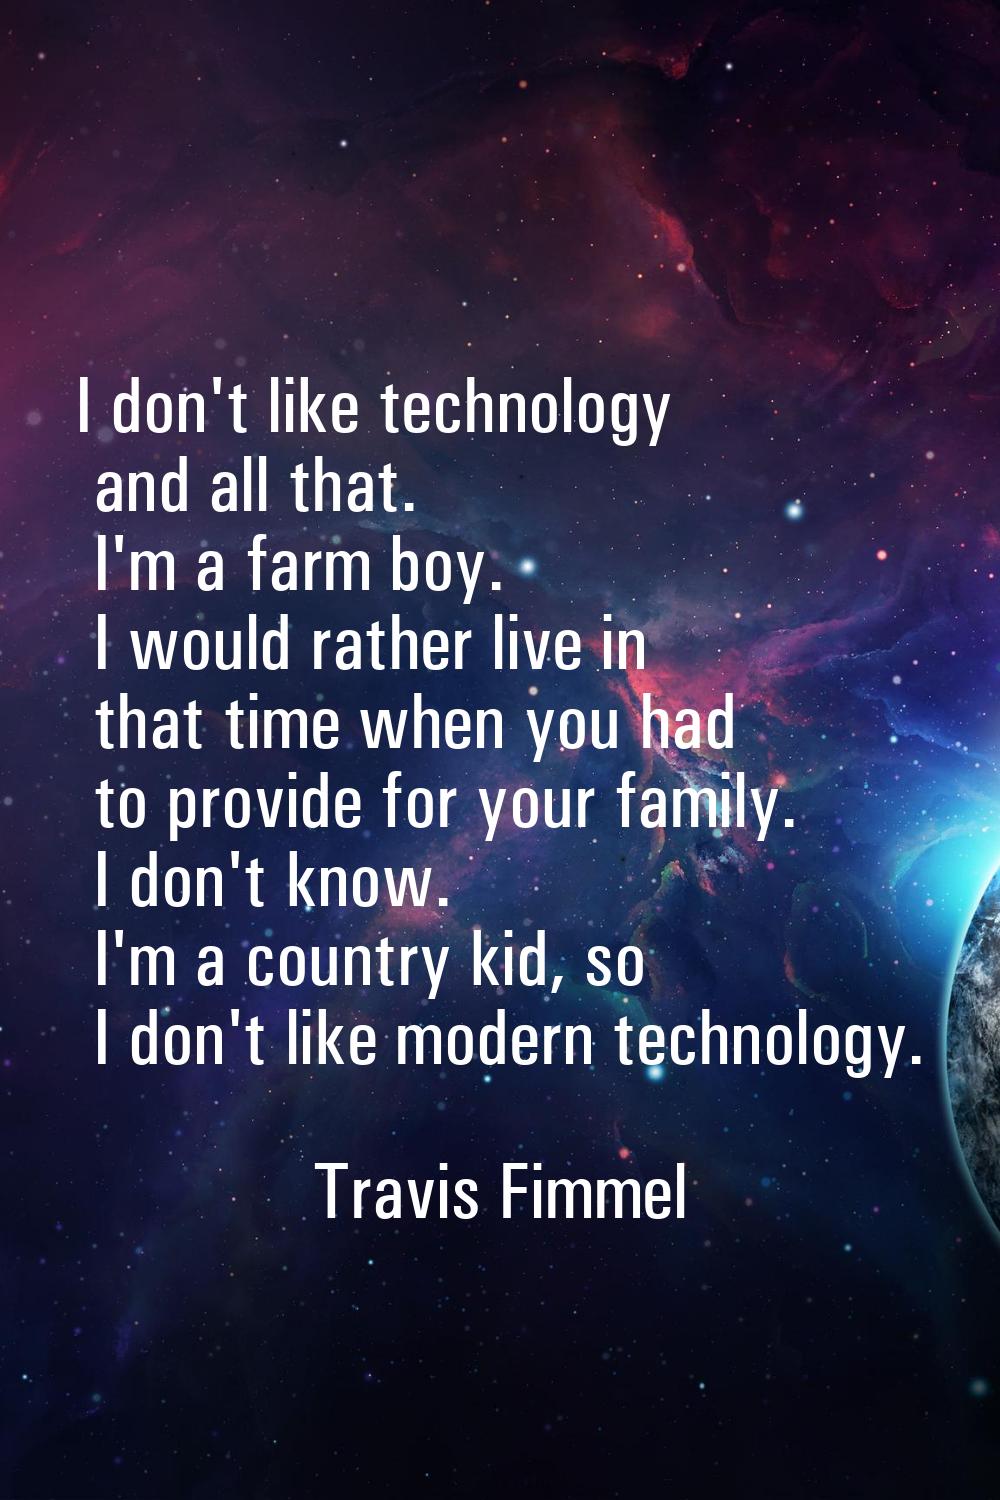 I don't like technology and all that. I'm a farm boy. I would rather live in that time when you had